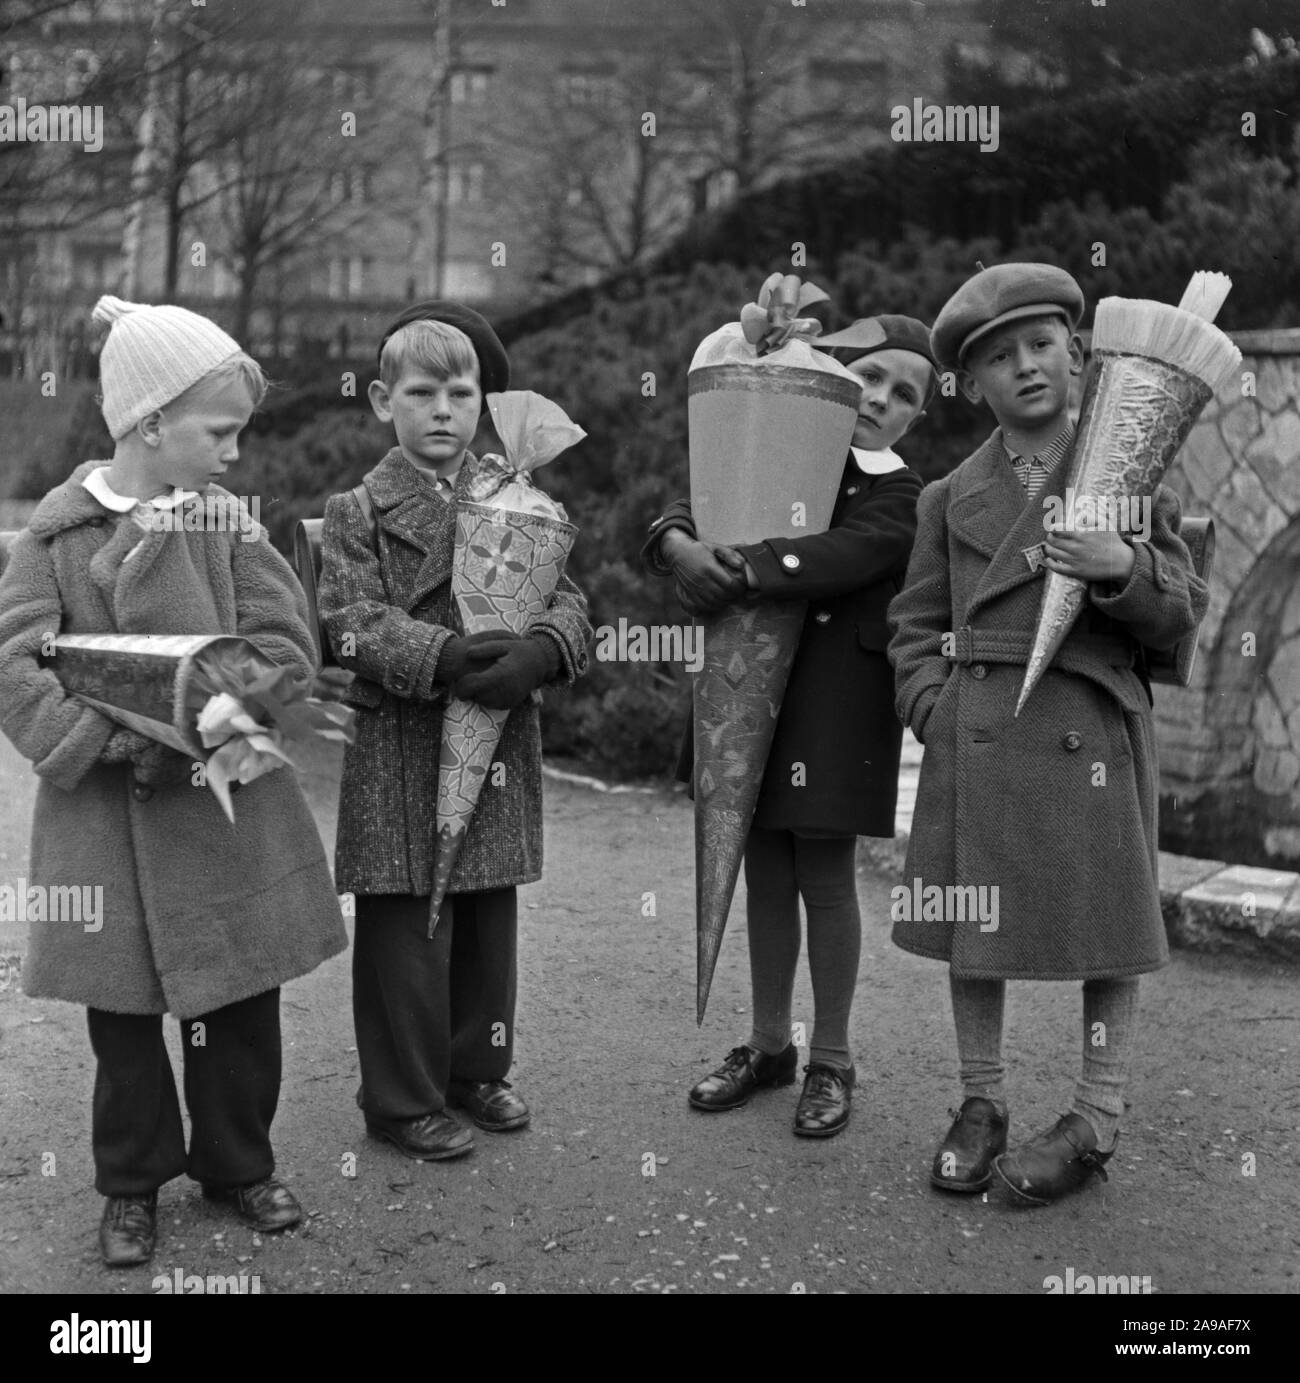 First day at school has come, Germany 1930s. Stock Photo